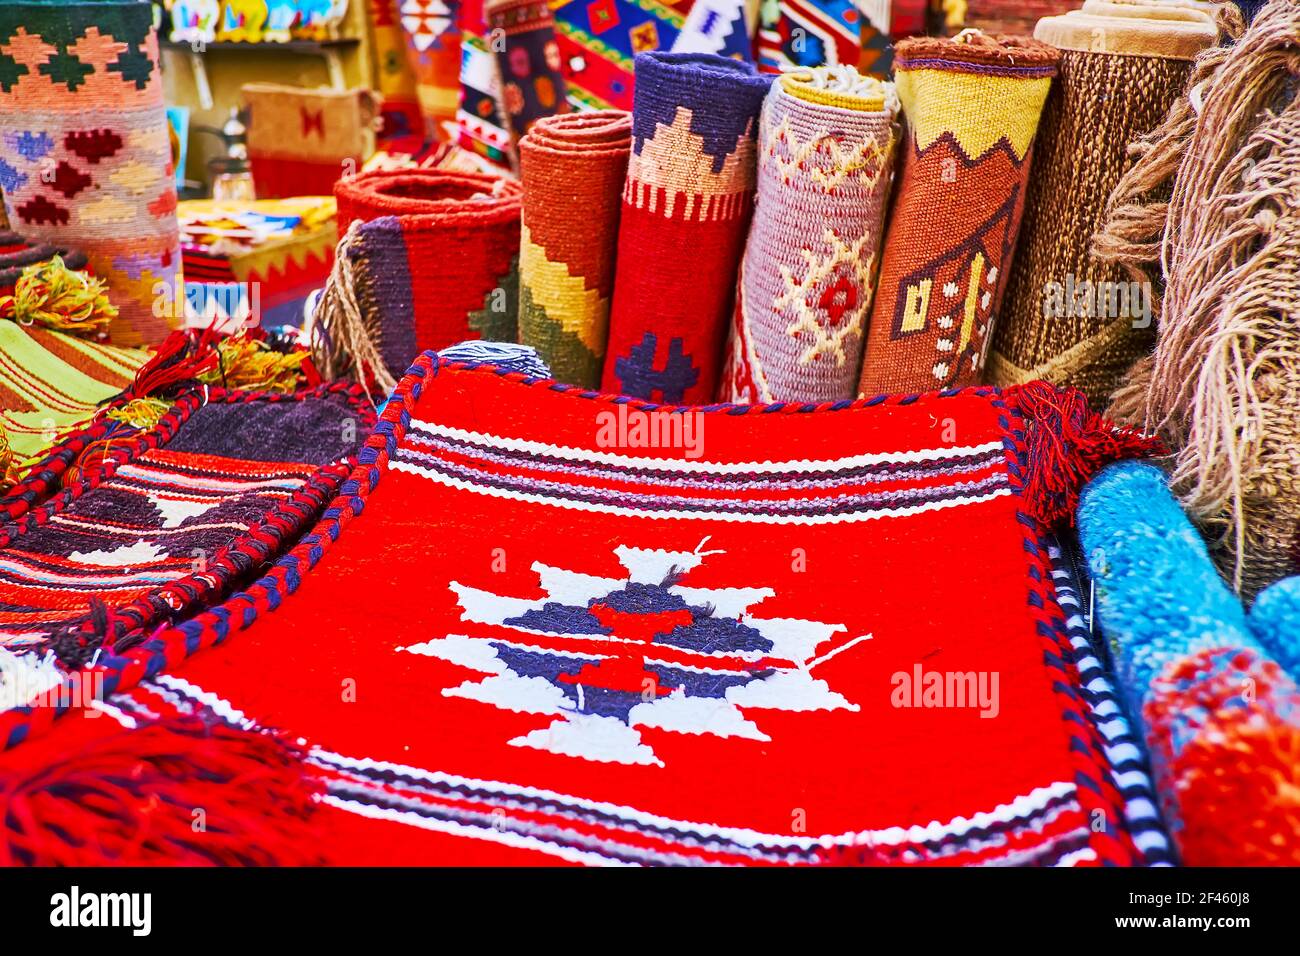 The carpet rolls, rugs and pillow cases, decorated with colored tribal patterns in stall of Al Souk al Kabir (Old Market) in Dubai, UAE Stock Photo